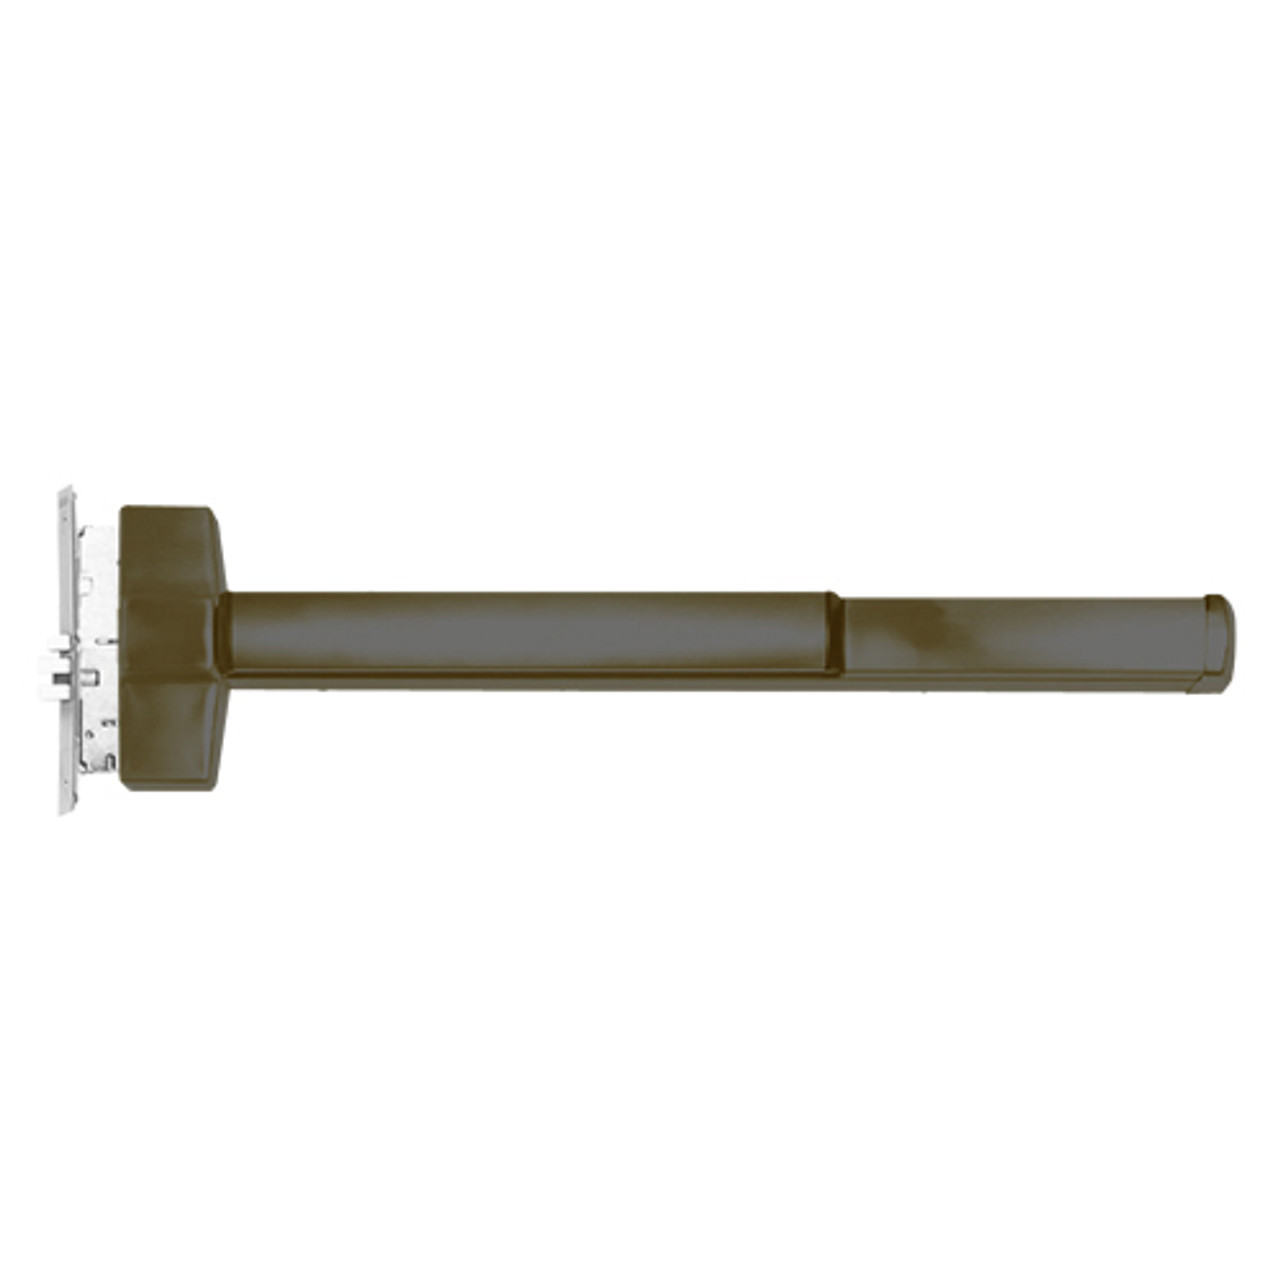 ED5600ATD-613-W048-RHR Corbin ED5600 Series Fire Rated Mortise Exit Device with Delayed Egress in Oil Rubbed Bronze Finish